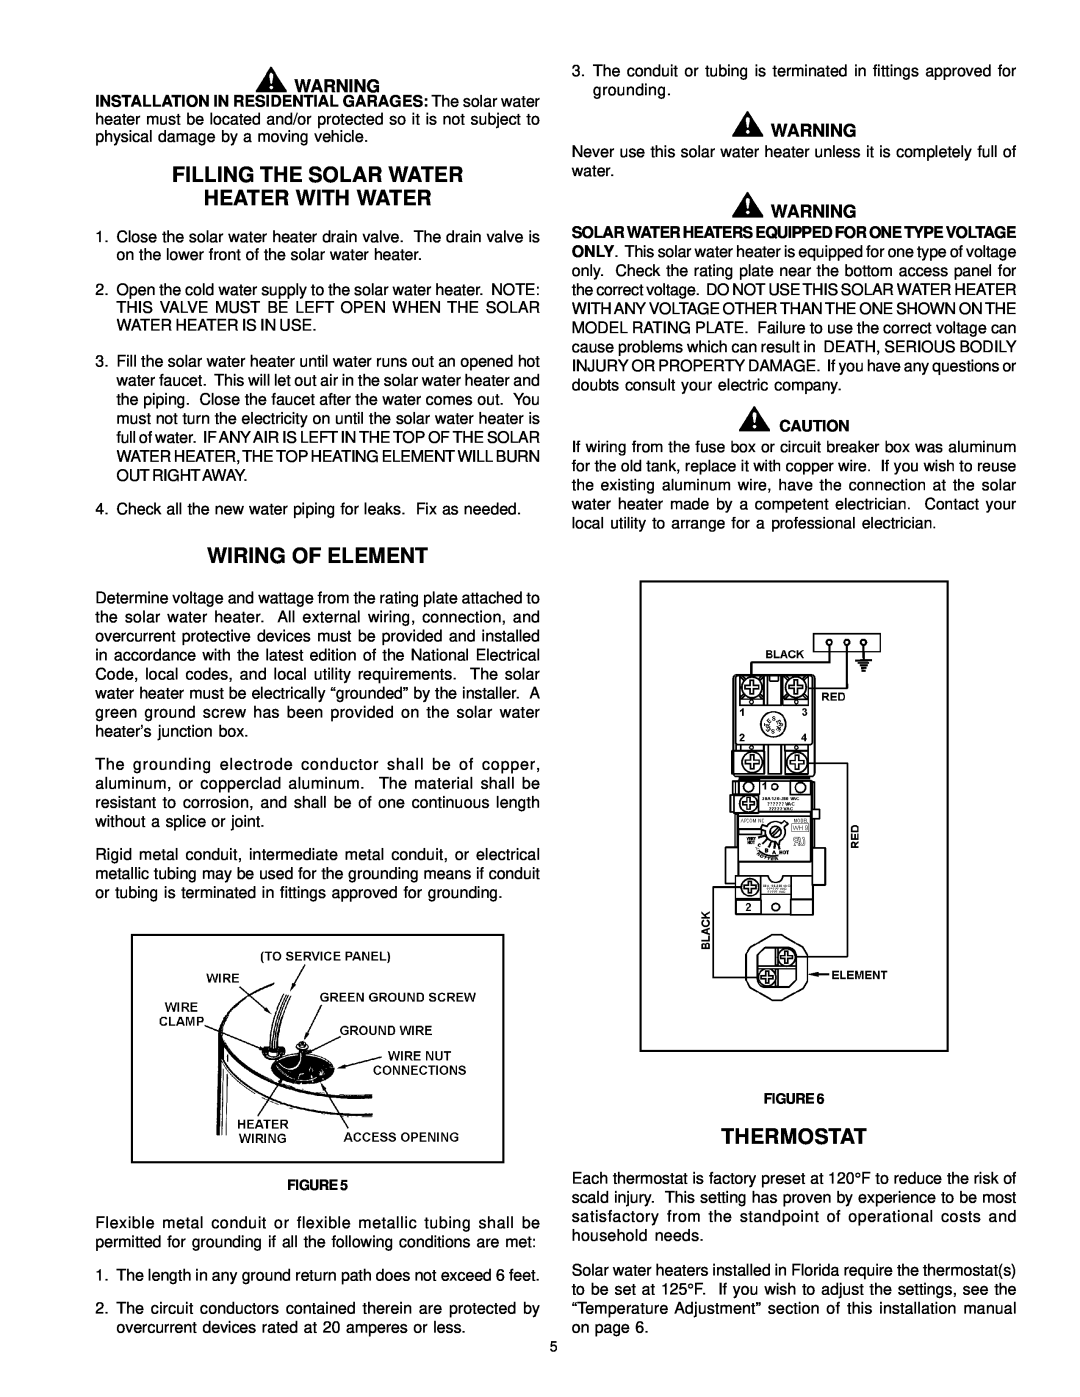 American Water Heater 317365-002 Filling The Solar Water Heater With Water, Wiring Of Element, Thermostat 